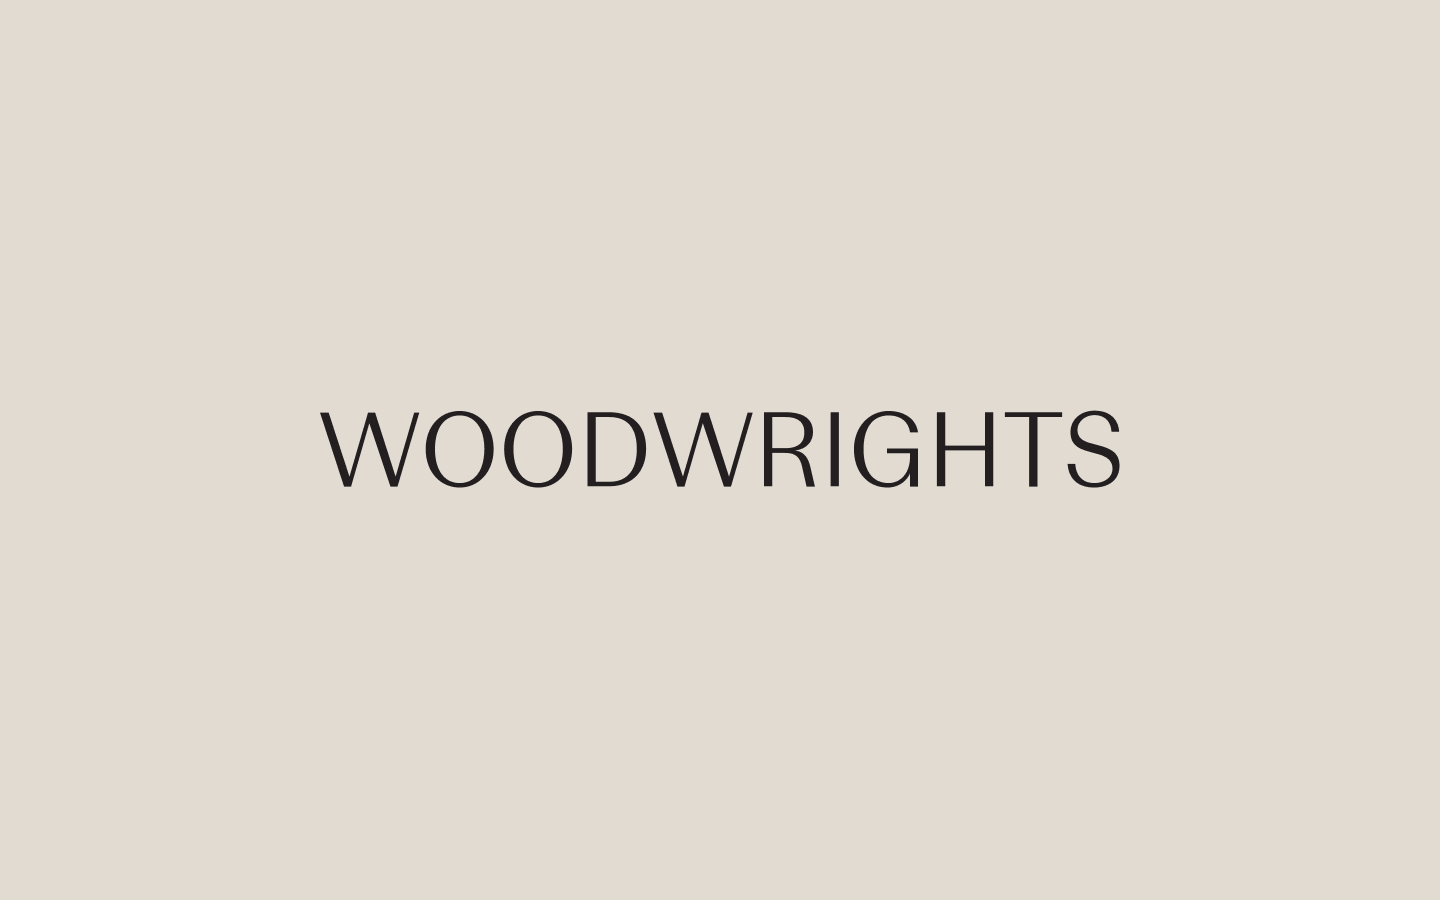 Woodwrights